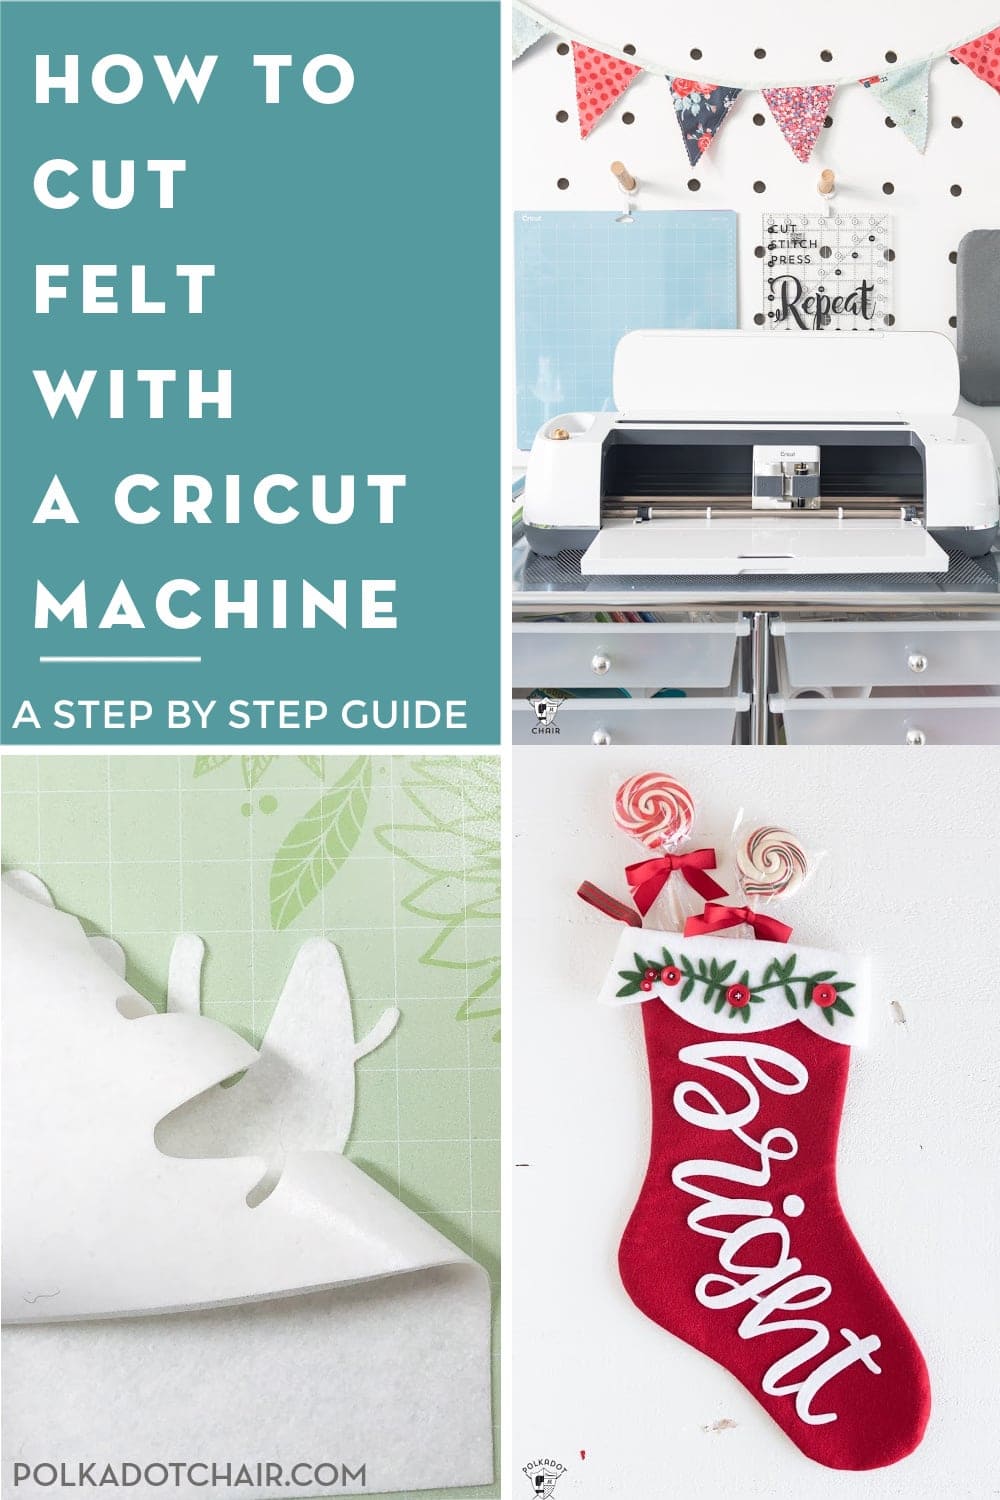 How to Make Long Cuts with Cricut Maker 3 